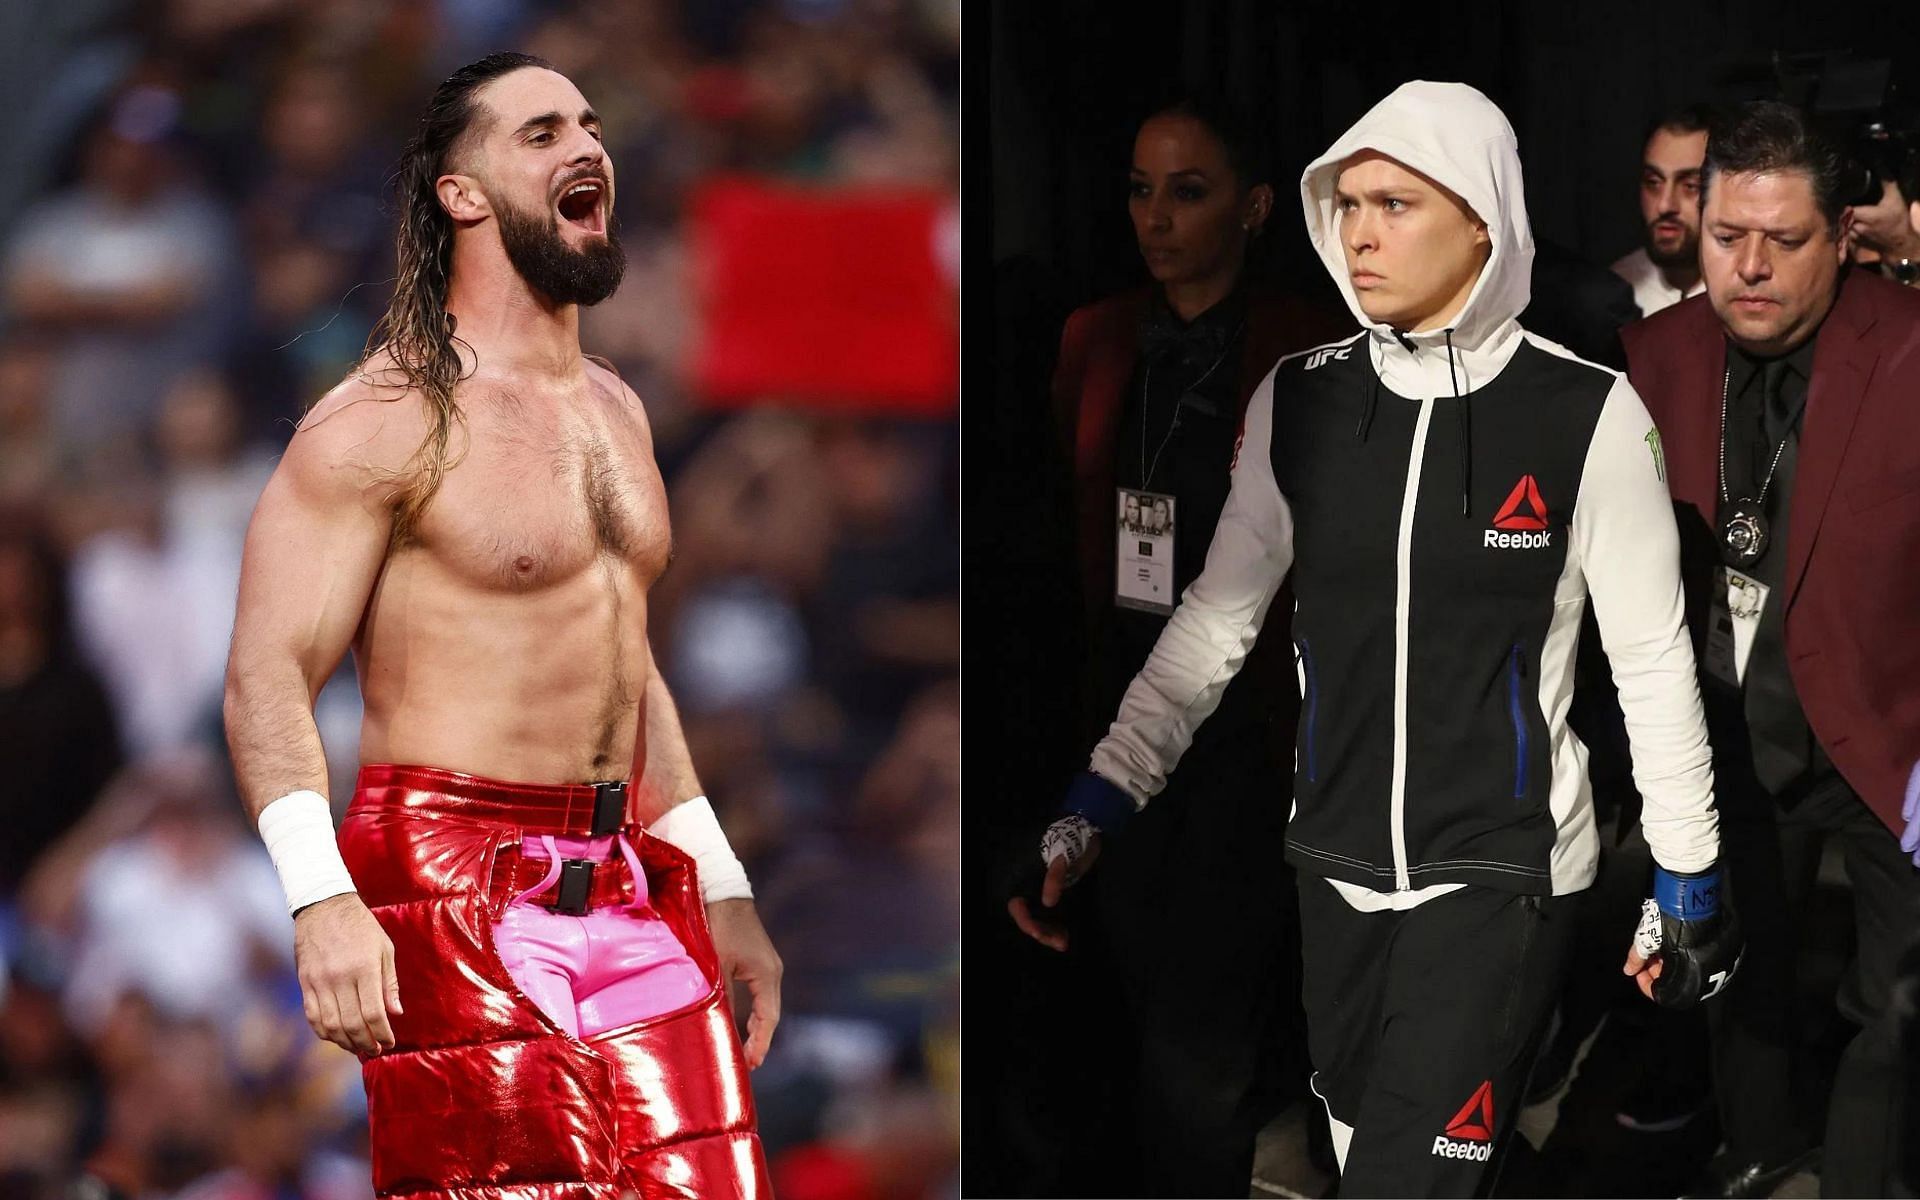 Seth Rollins (left) speaks about Ronda Rousey and other UFC athletes [Images via Getty]